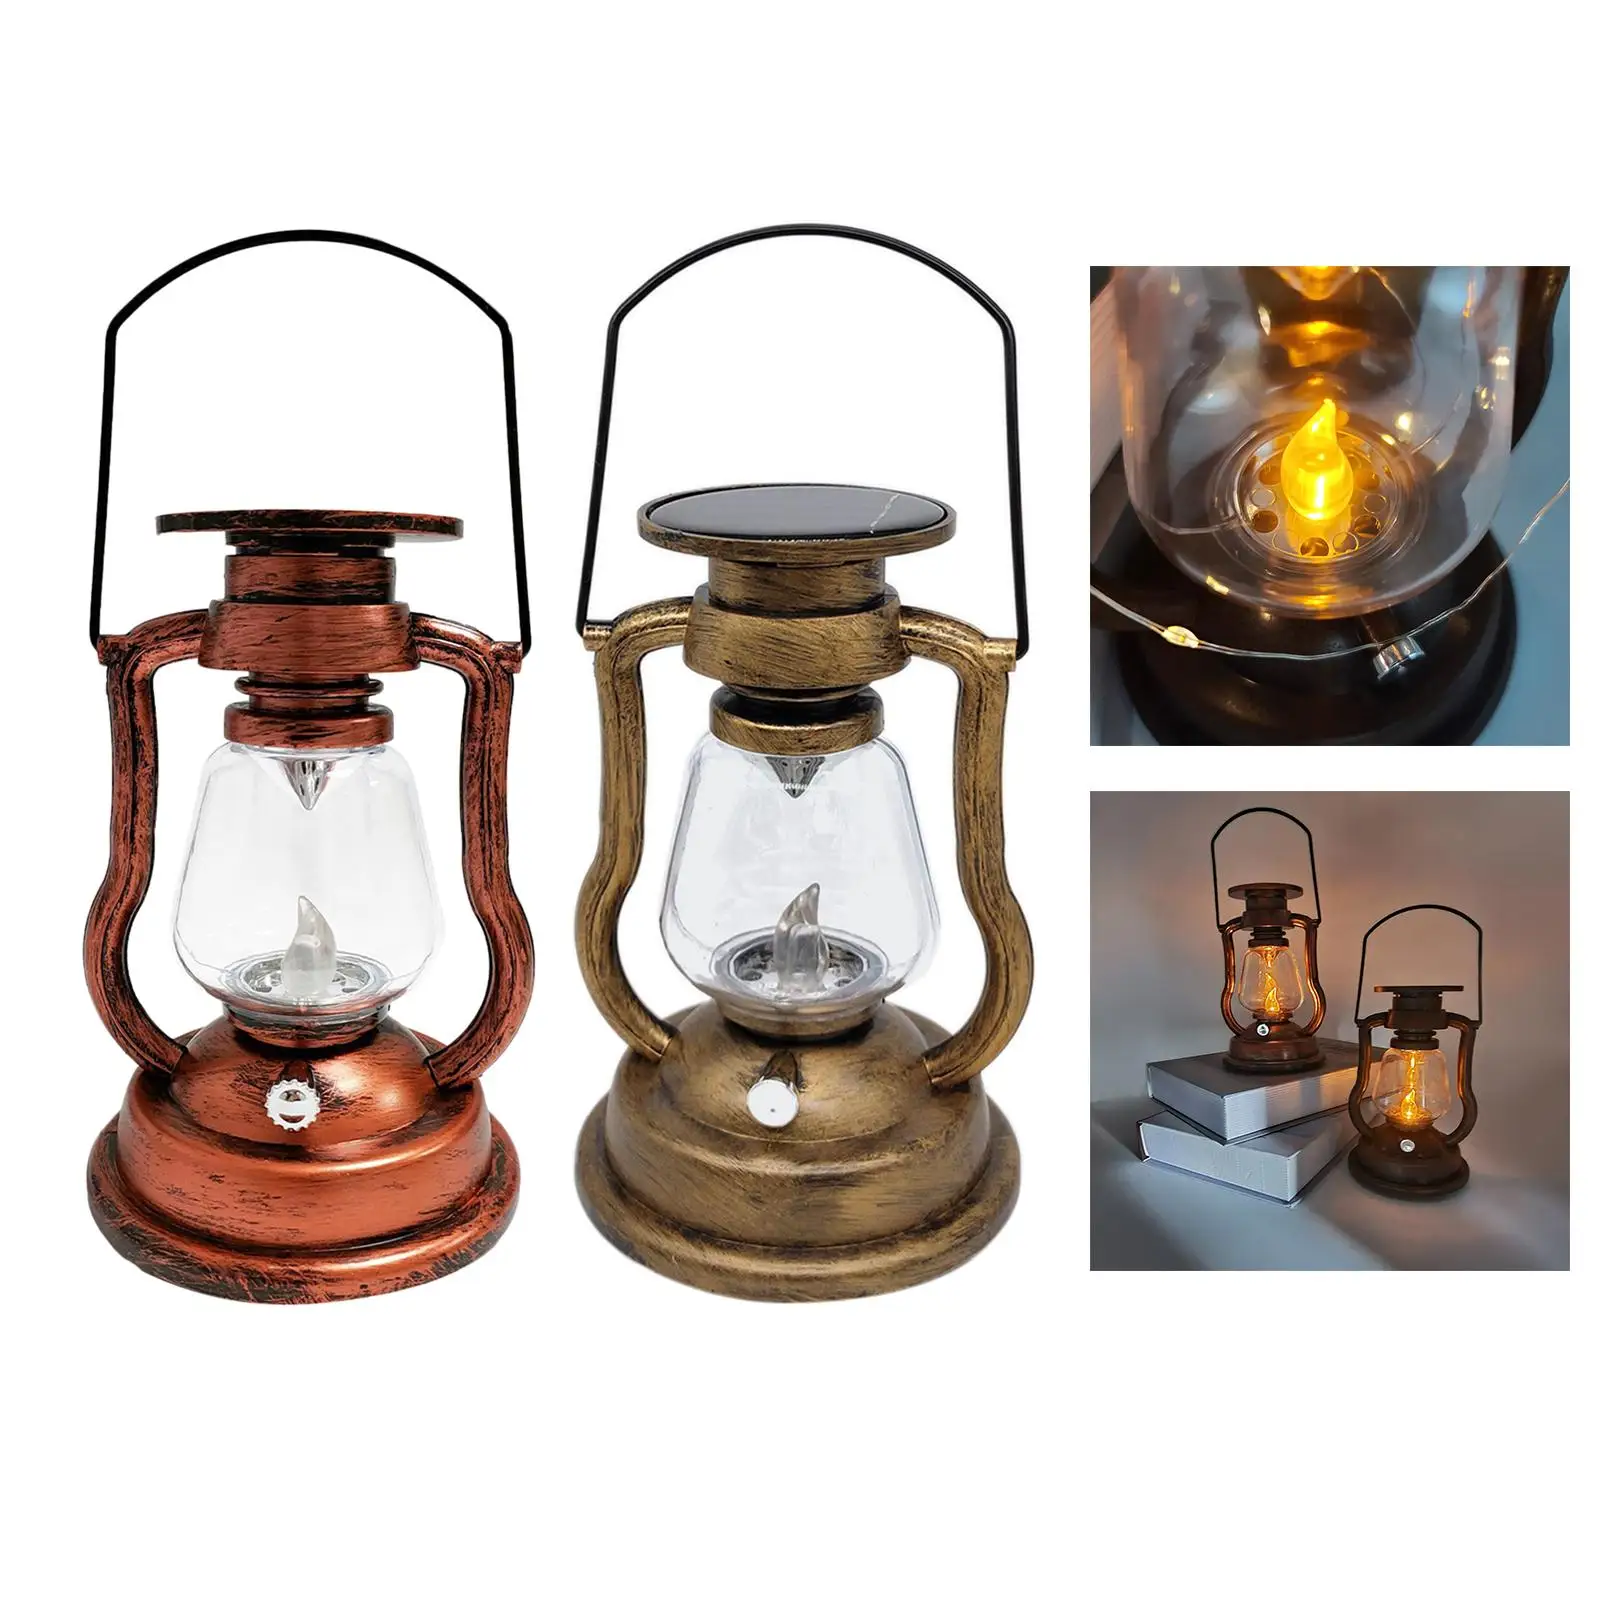 Outdoors Camping Lanterns Solar Lighting Water Resistant Fishing Hiking Portable Camping Lights for Fence Path Walkway Ornaments